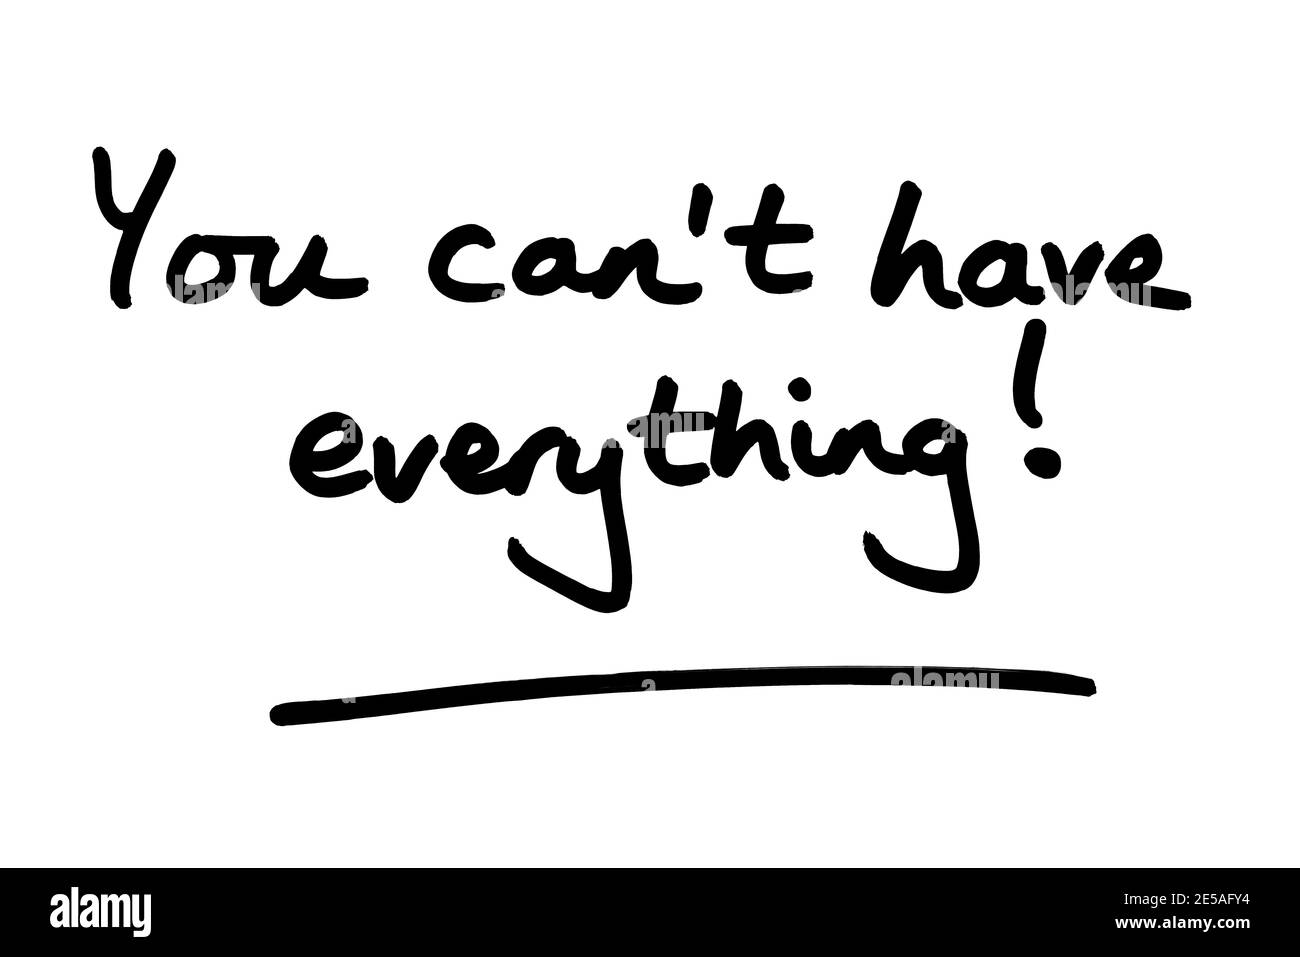 You cant have everything! handwritten on a white background. Stock Photo